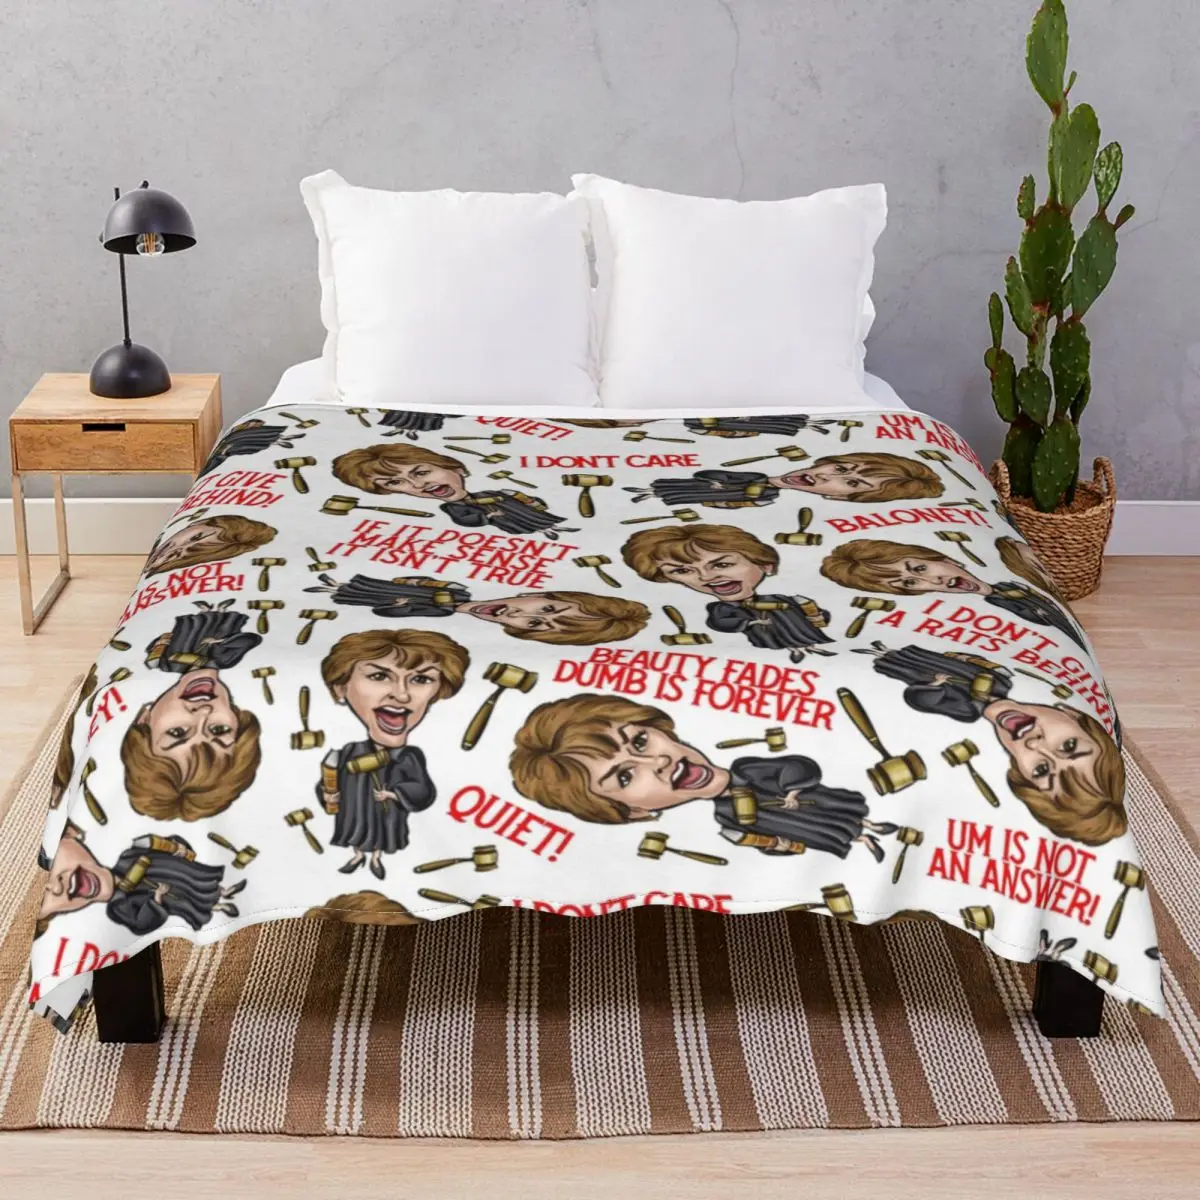 White Judge Judy Print Blanket Flannel Printed Comfortable Throw Blankets for Bedding Home Couch Camp Cinema